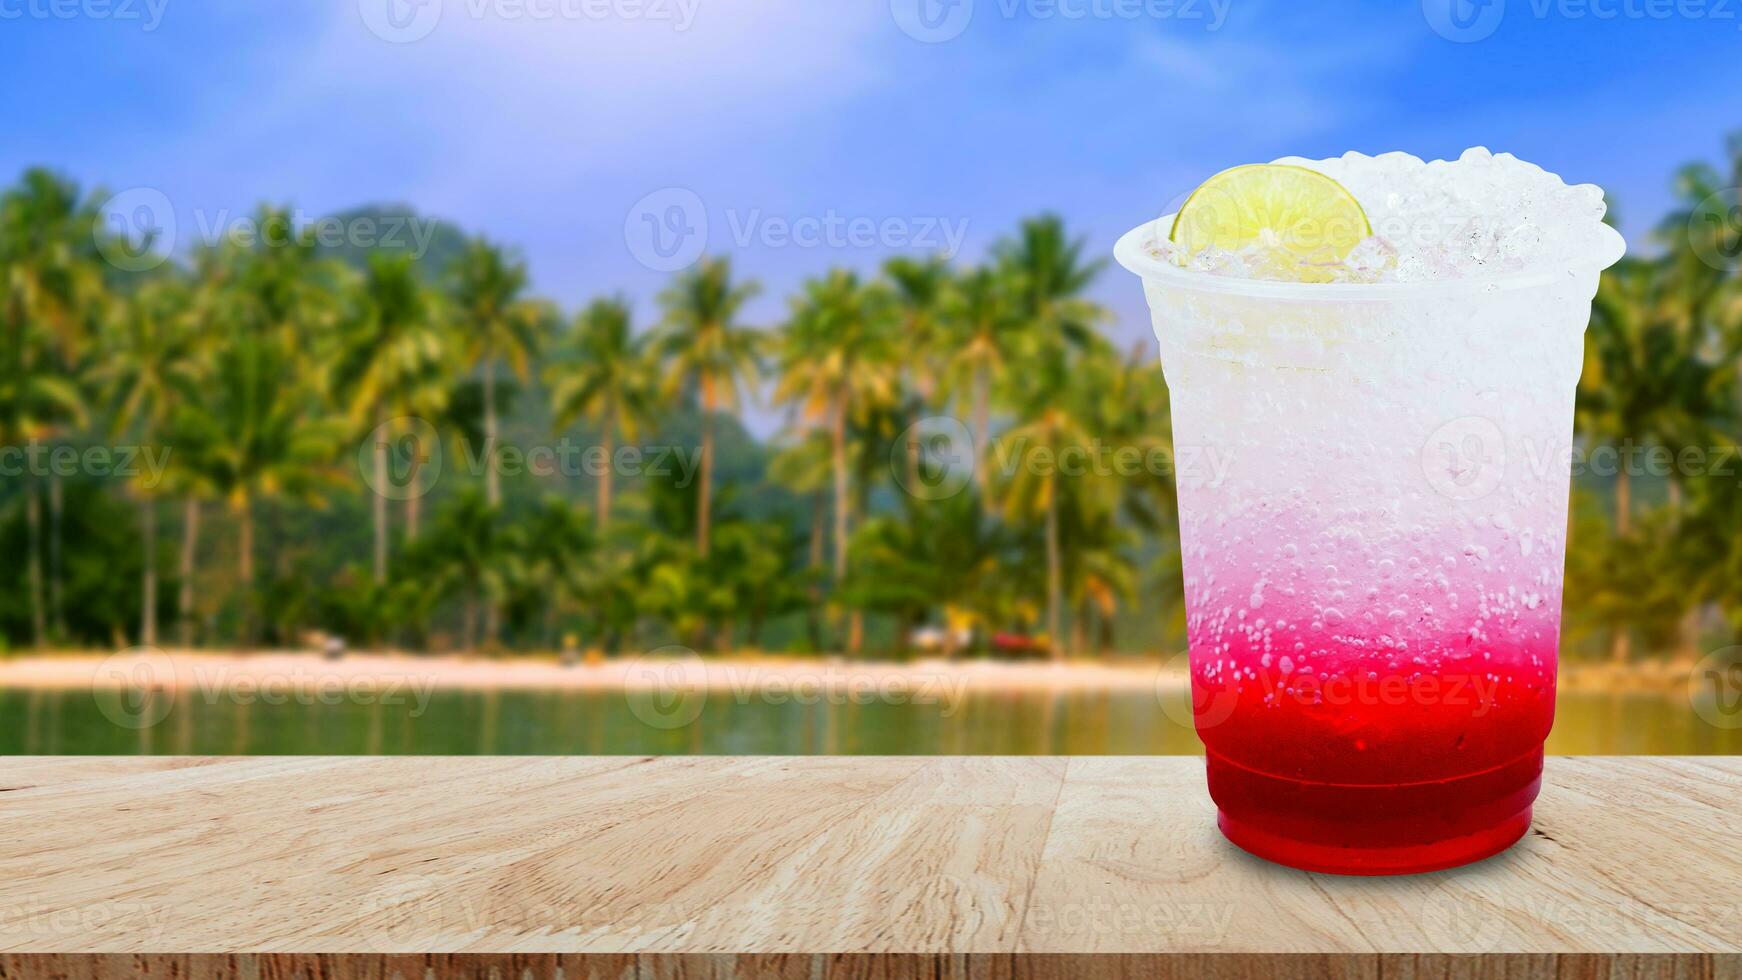 Italian soda made from fruit syrup drink mix in plastic cup on wooden table. Lemon, Red cocktail summer refreshment drink, Summer drinks with ice photo